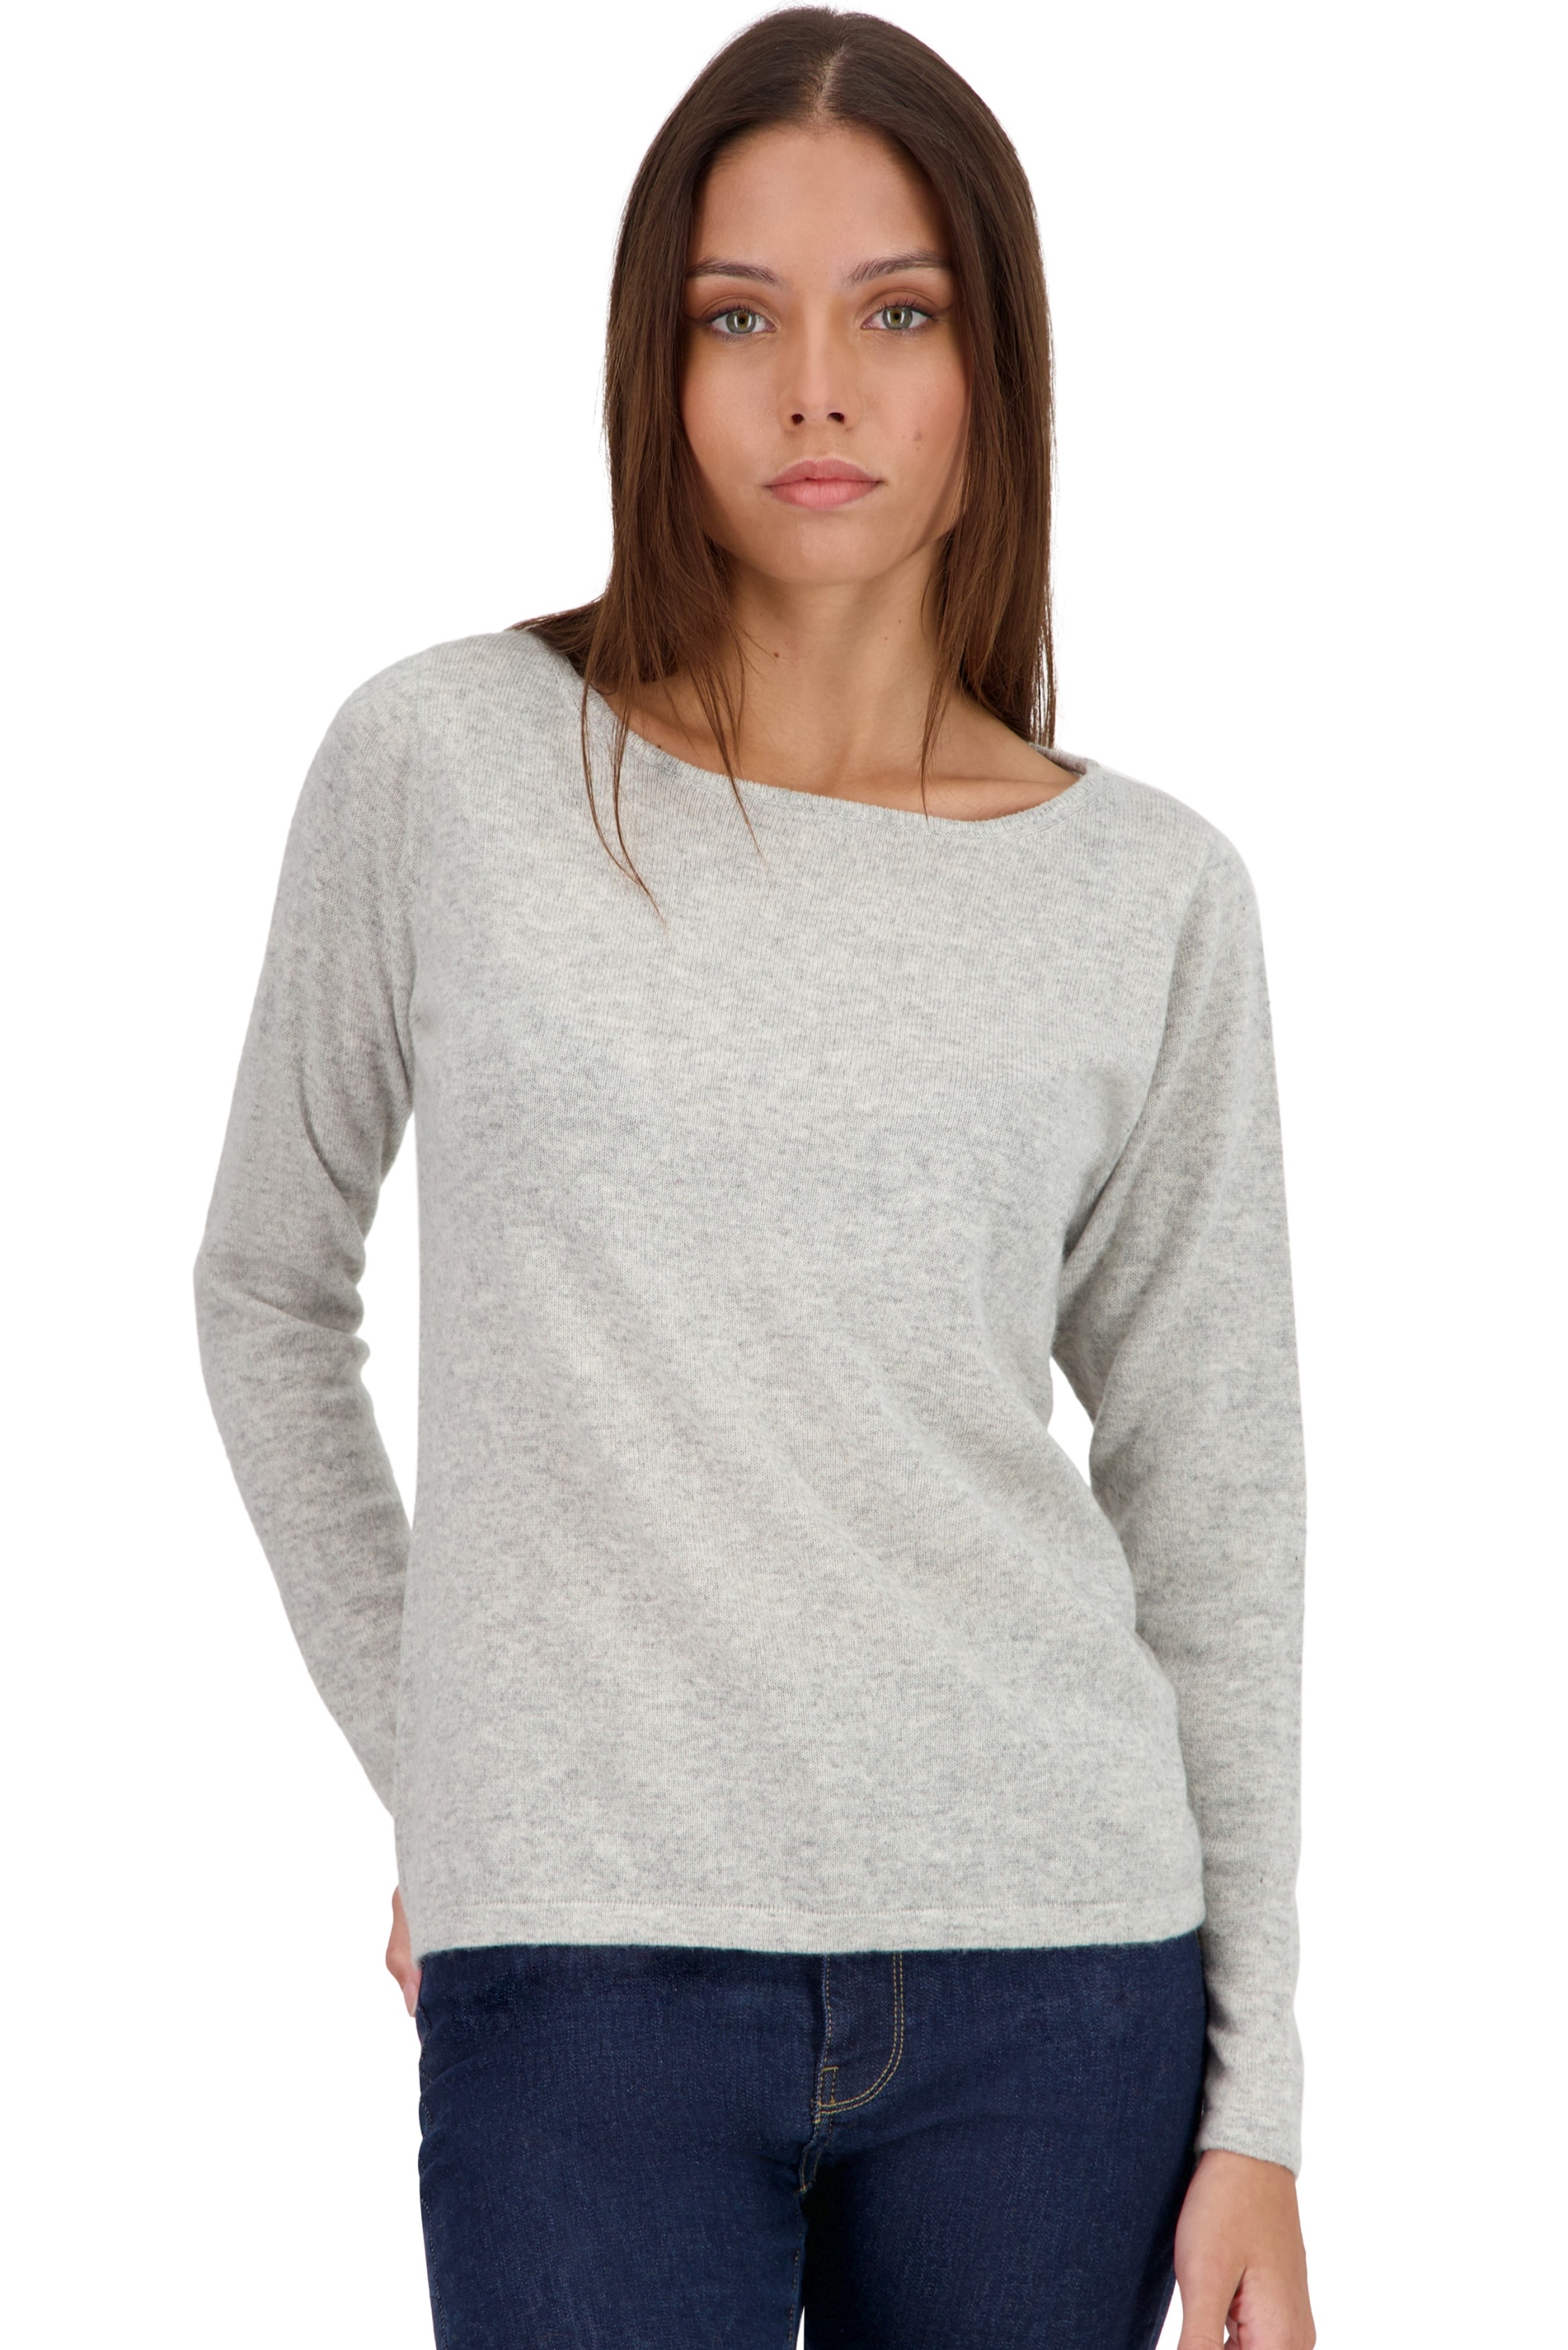 Cashmere ladies basic sweaters at low prices tennessy first flannel s